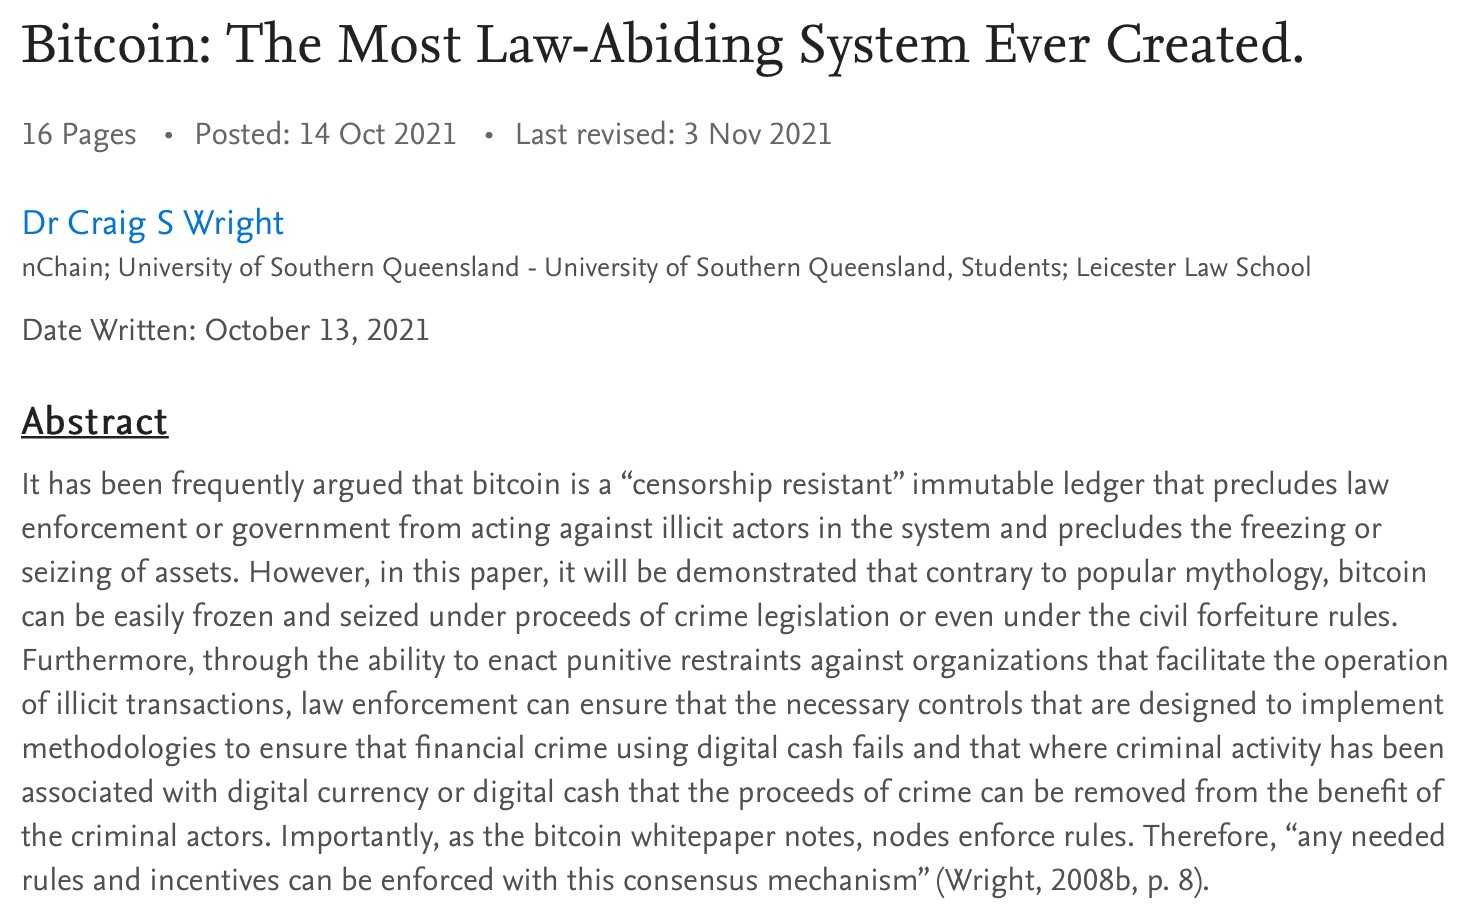 Bitcoin: The most law-abiding system ever created